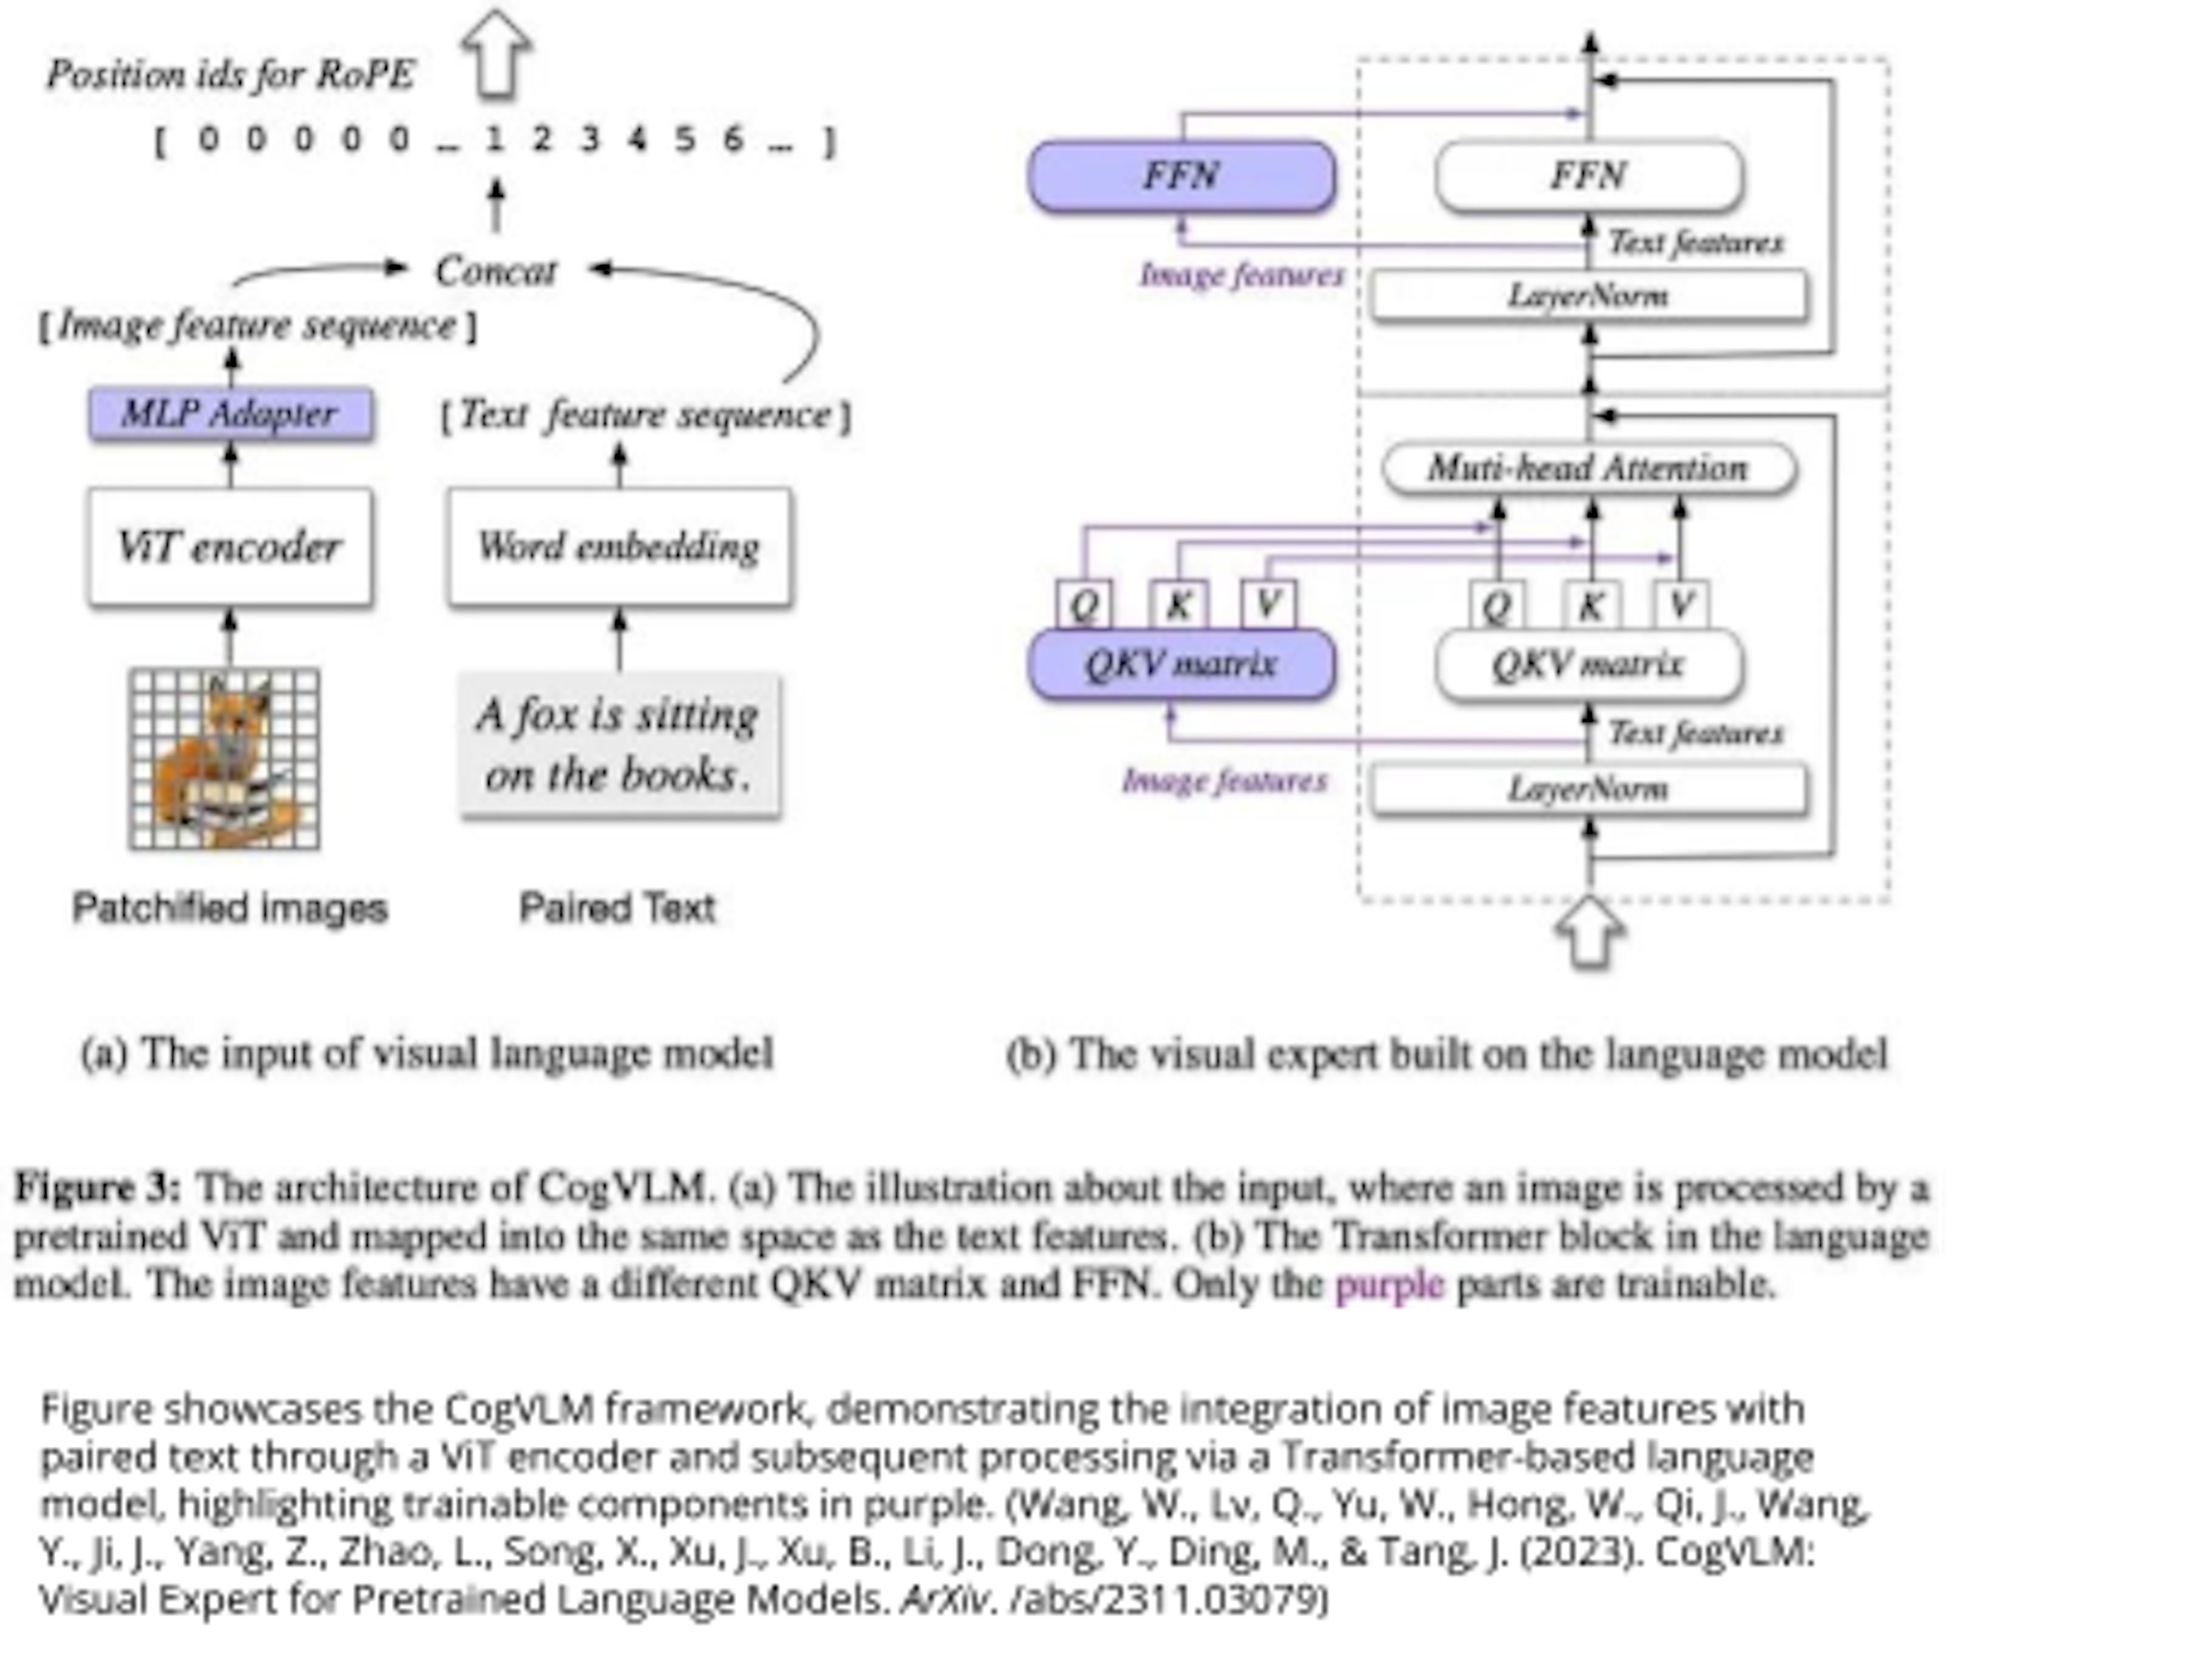 Examples of inputs and outputs obtained from 80B parameter Flamingo model (Weights & Biases Blog, Dec 2022, DeepMind Flamingo: A Visual Language Model for Few-Shot Learning)